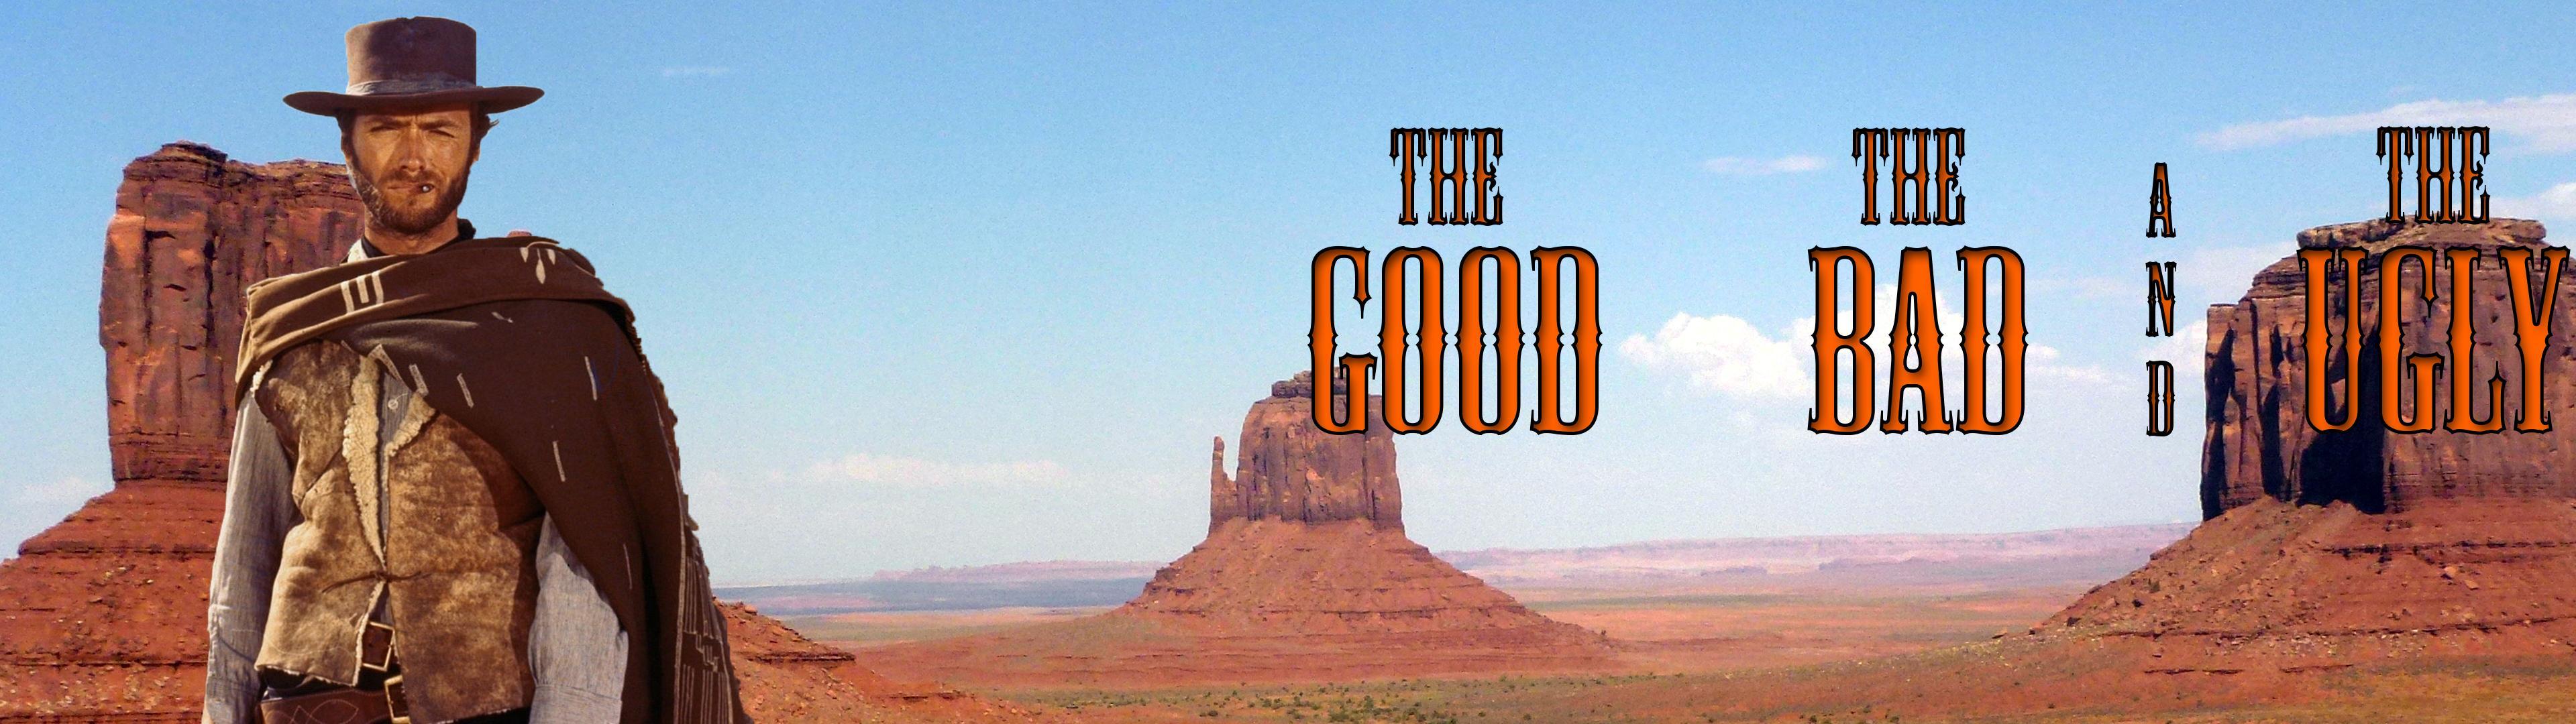 The Good, The Bad, And The Ugly (1966) HD Wallpaper From